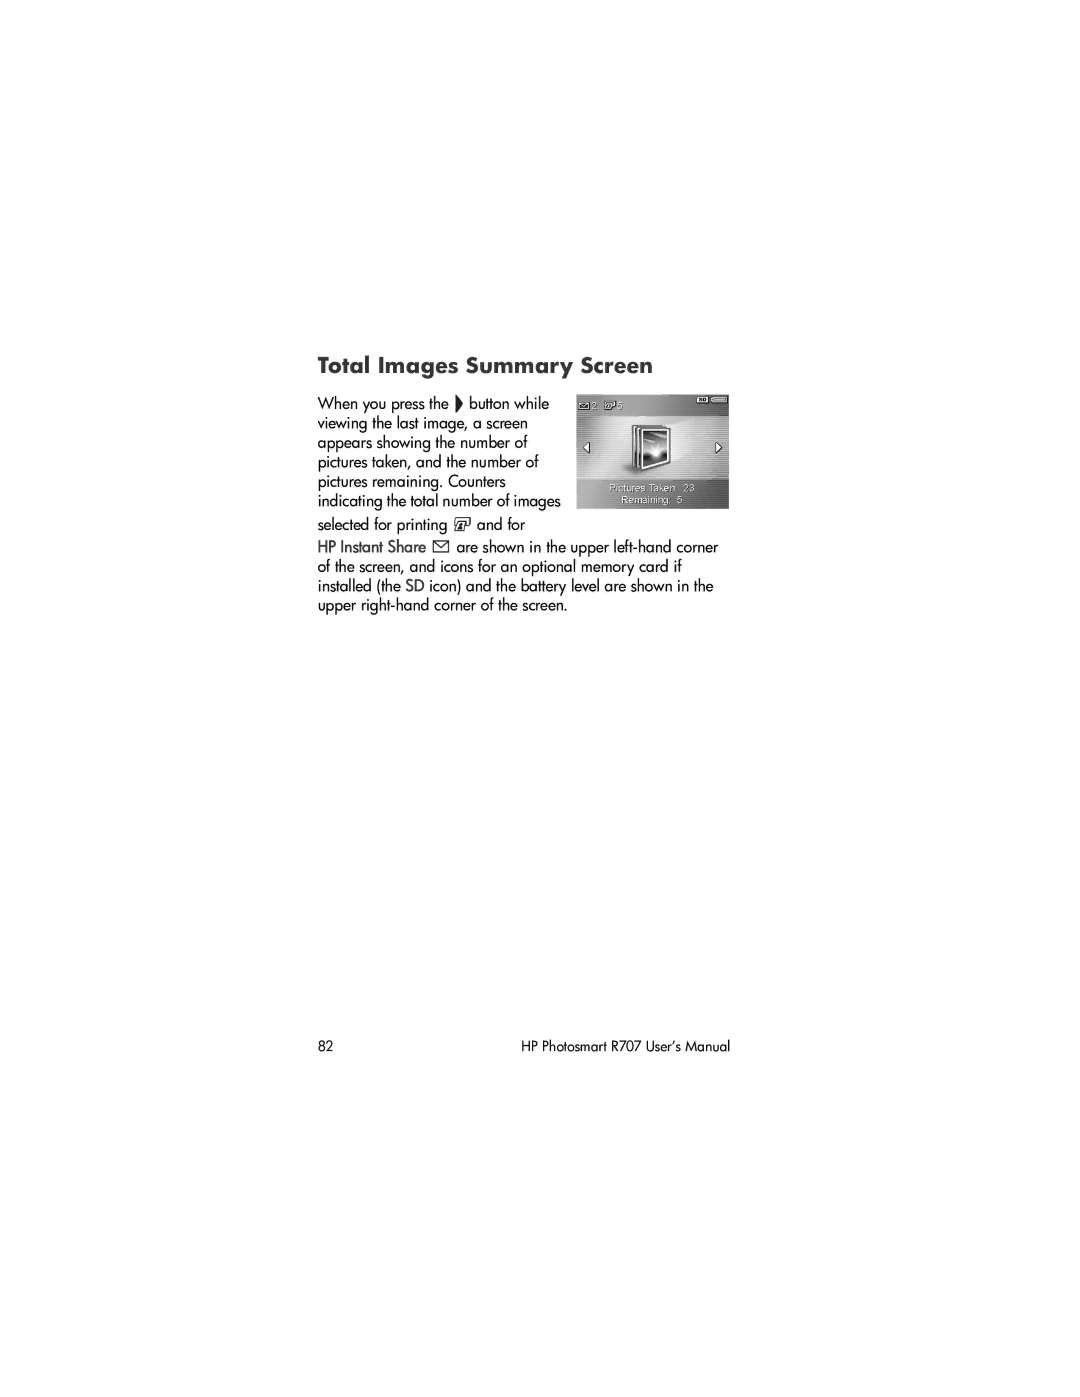 HP R707 manual Total Images Summary Screen 